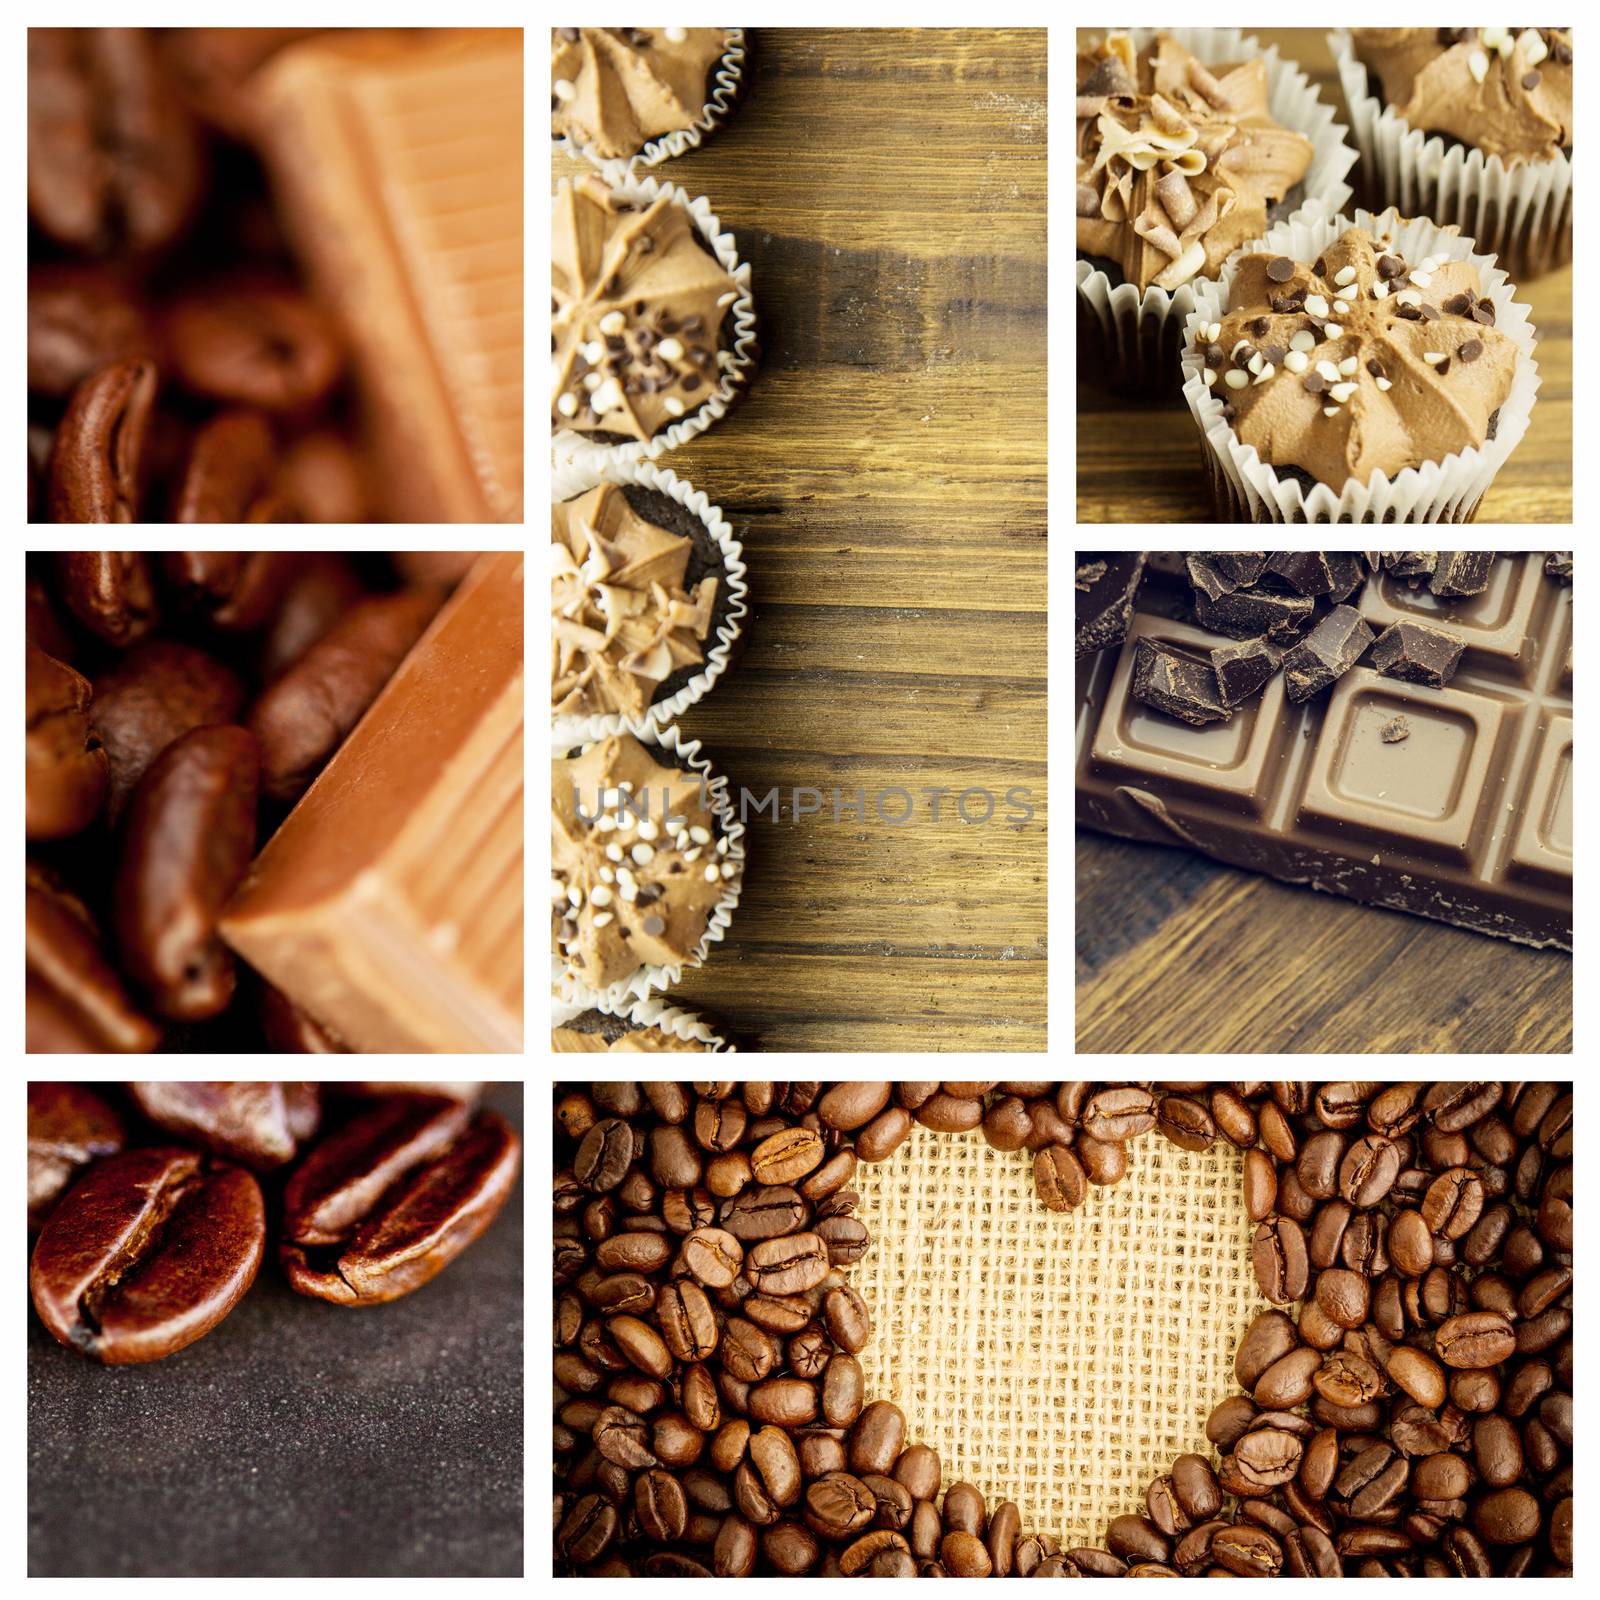 Chocolate pieces and coffee beans side by side against heart indent in coffee beans